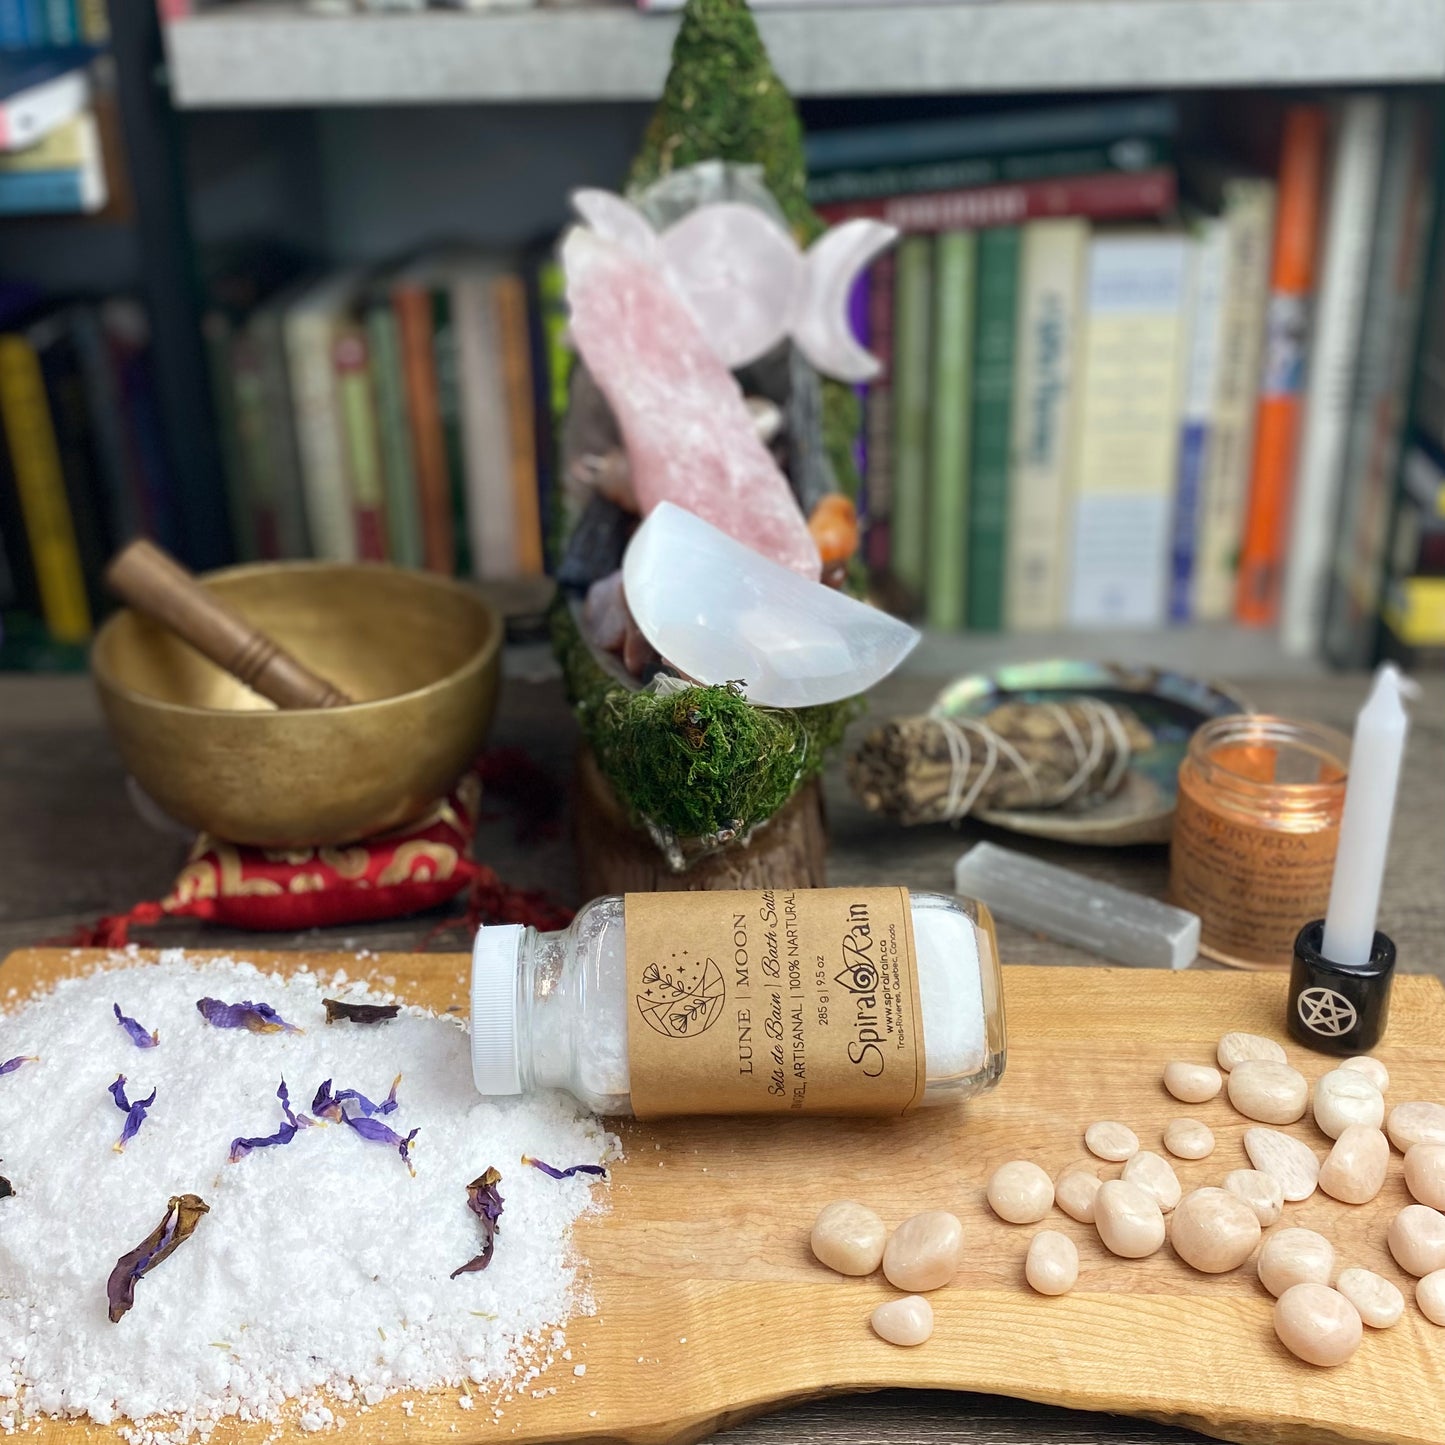 Moon bath salts at $20 only from Spiral Rain